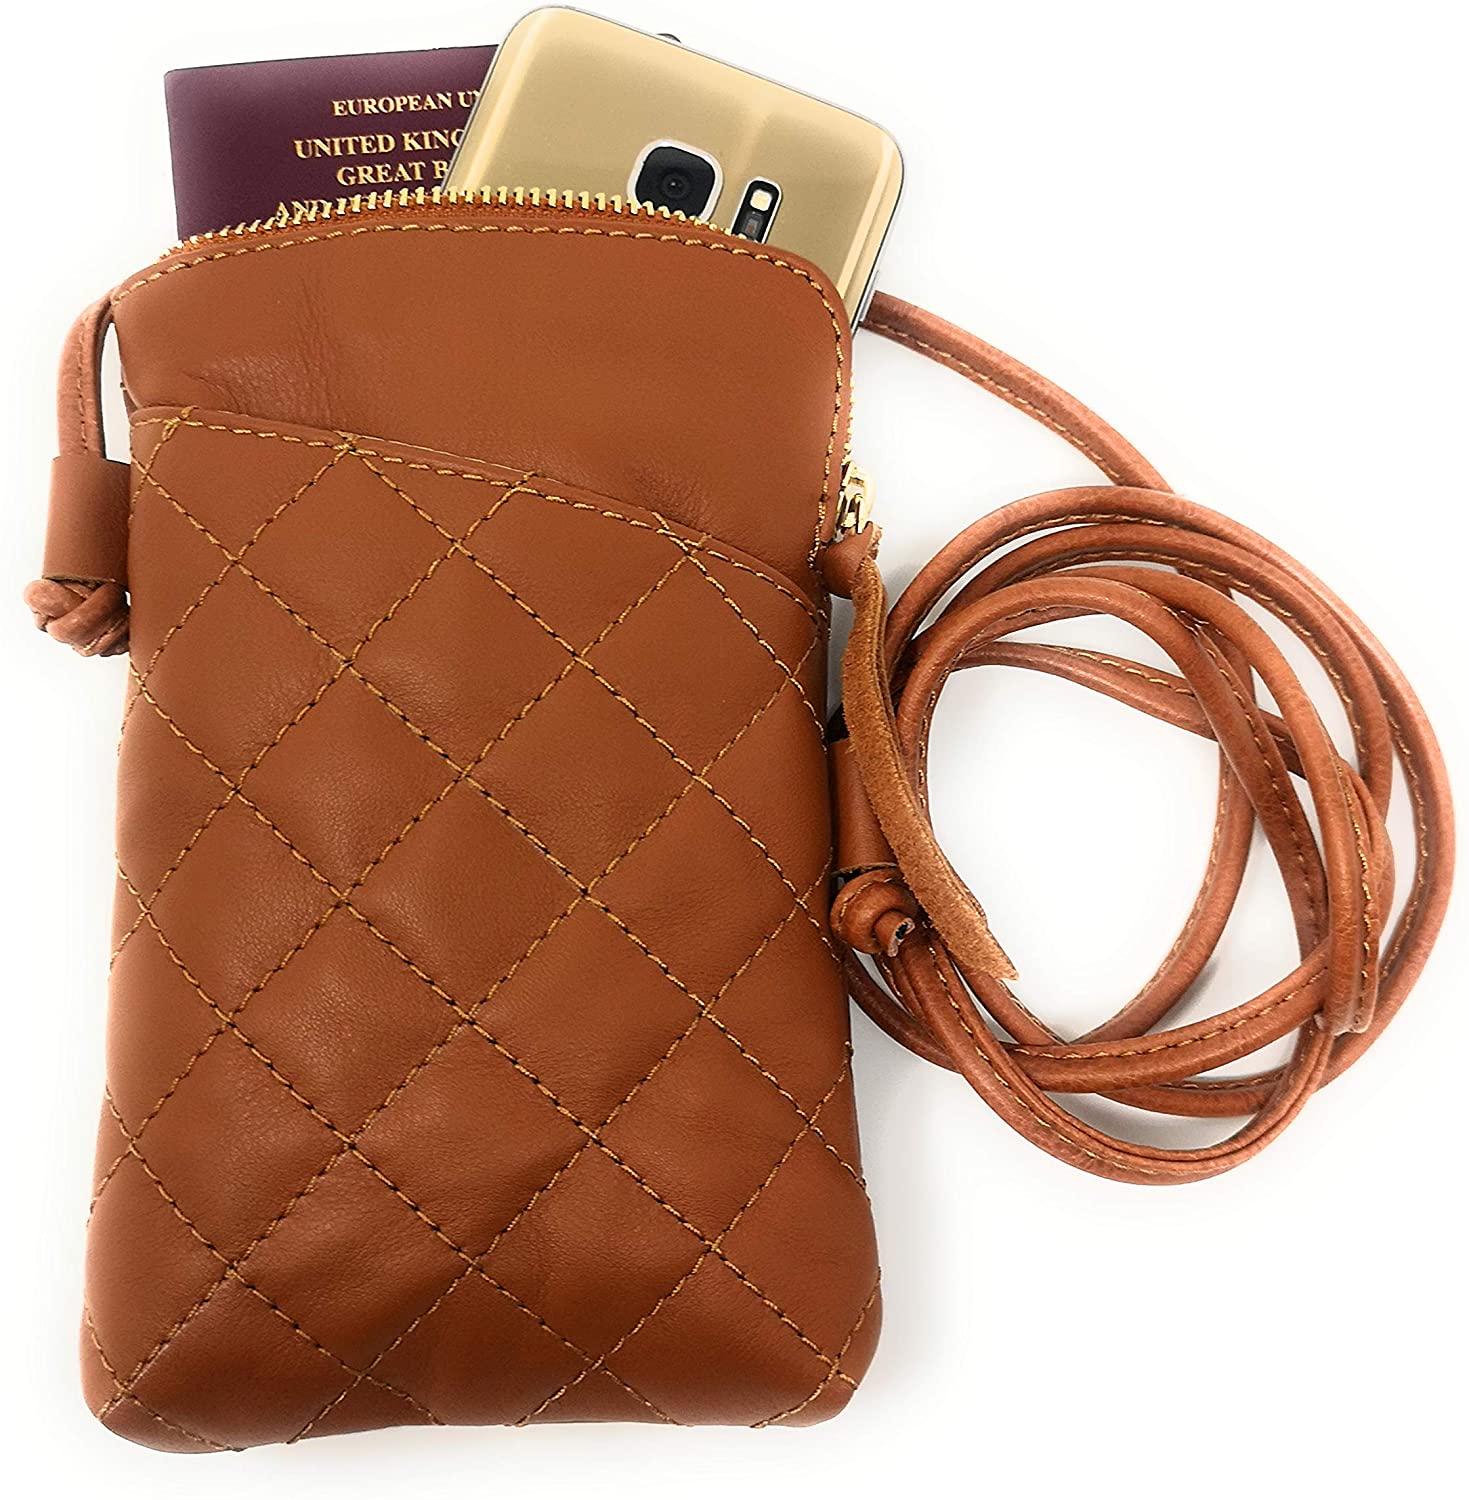 Monahay Small Italian Leather Cross Body Mobile Phone and Passport Travel Pouch Bag MH9723 